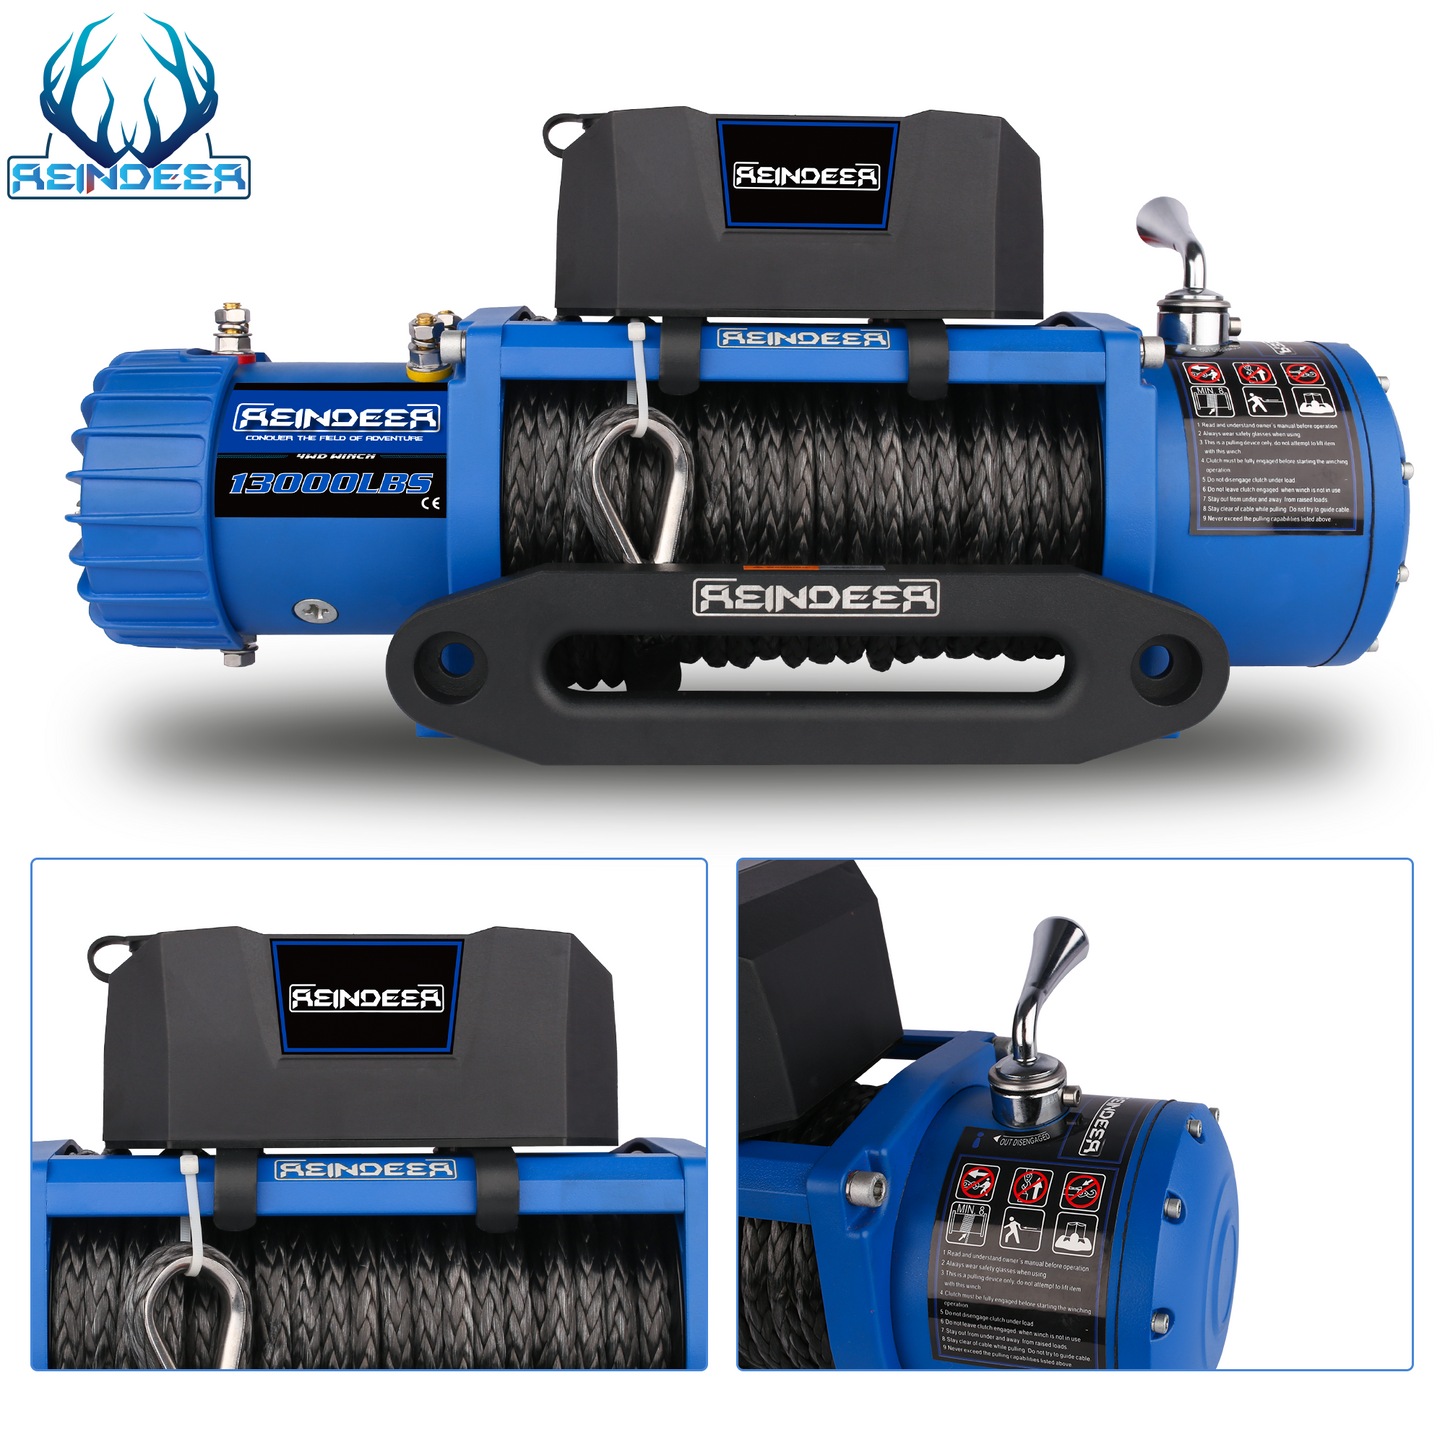 REINDEER New 12V Winch 13000 lb Load Capacity Electric Winch Synthetic Rope with Hawse Fairlead Waterproof IP67 with Wireless Handheld Remotes